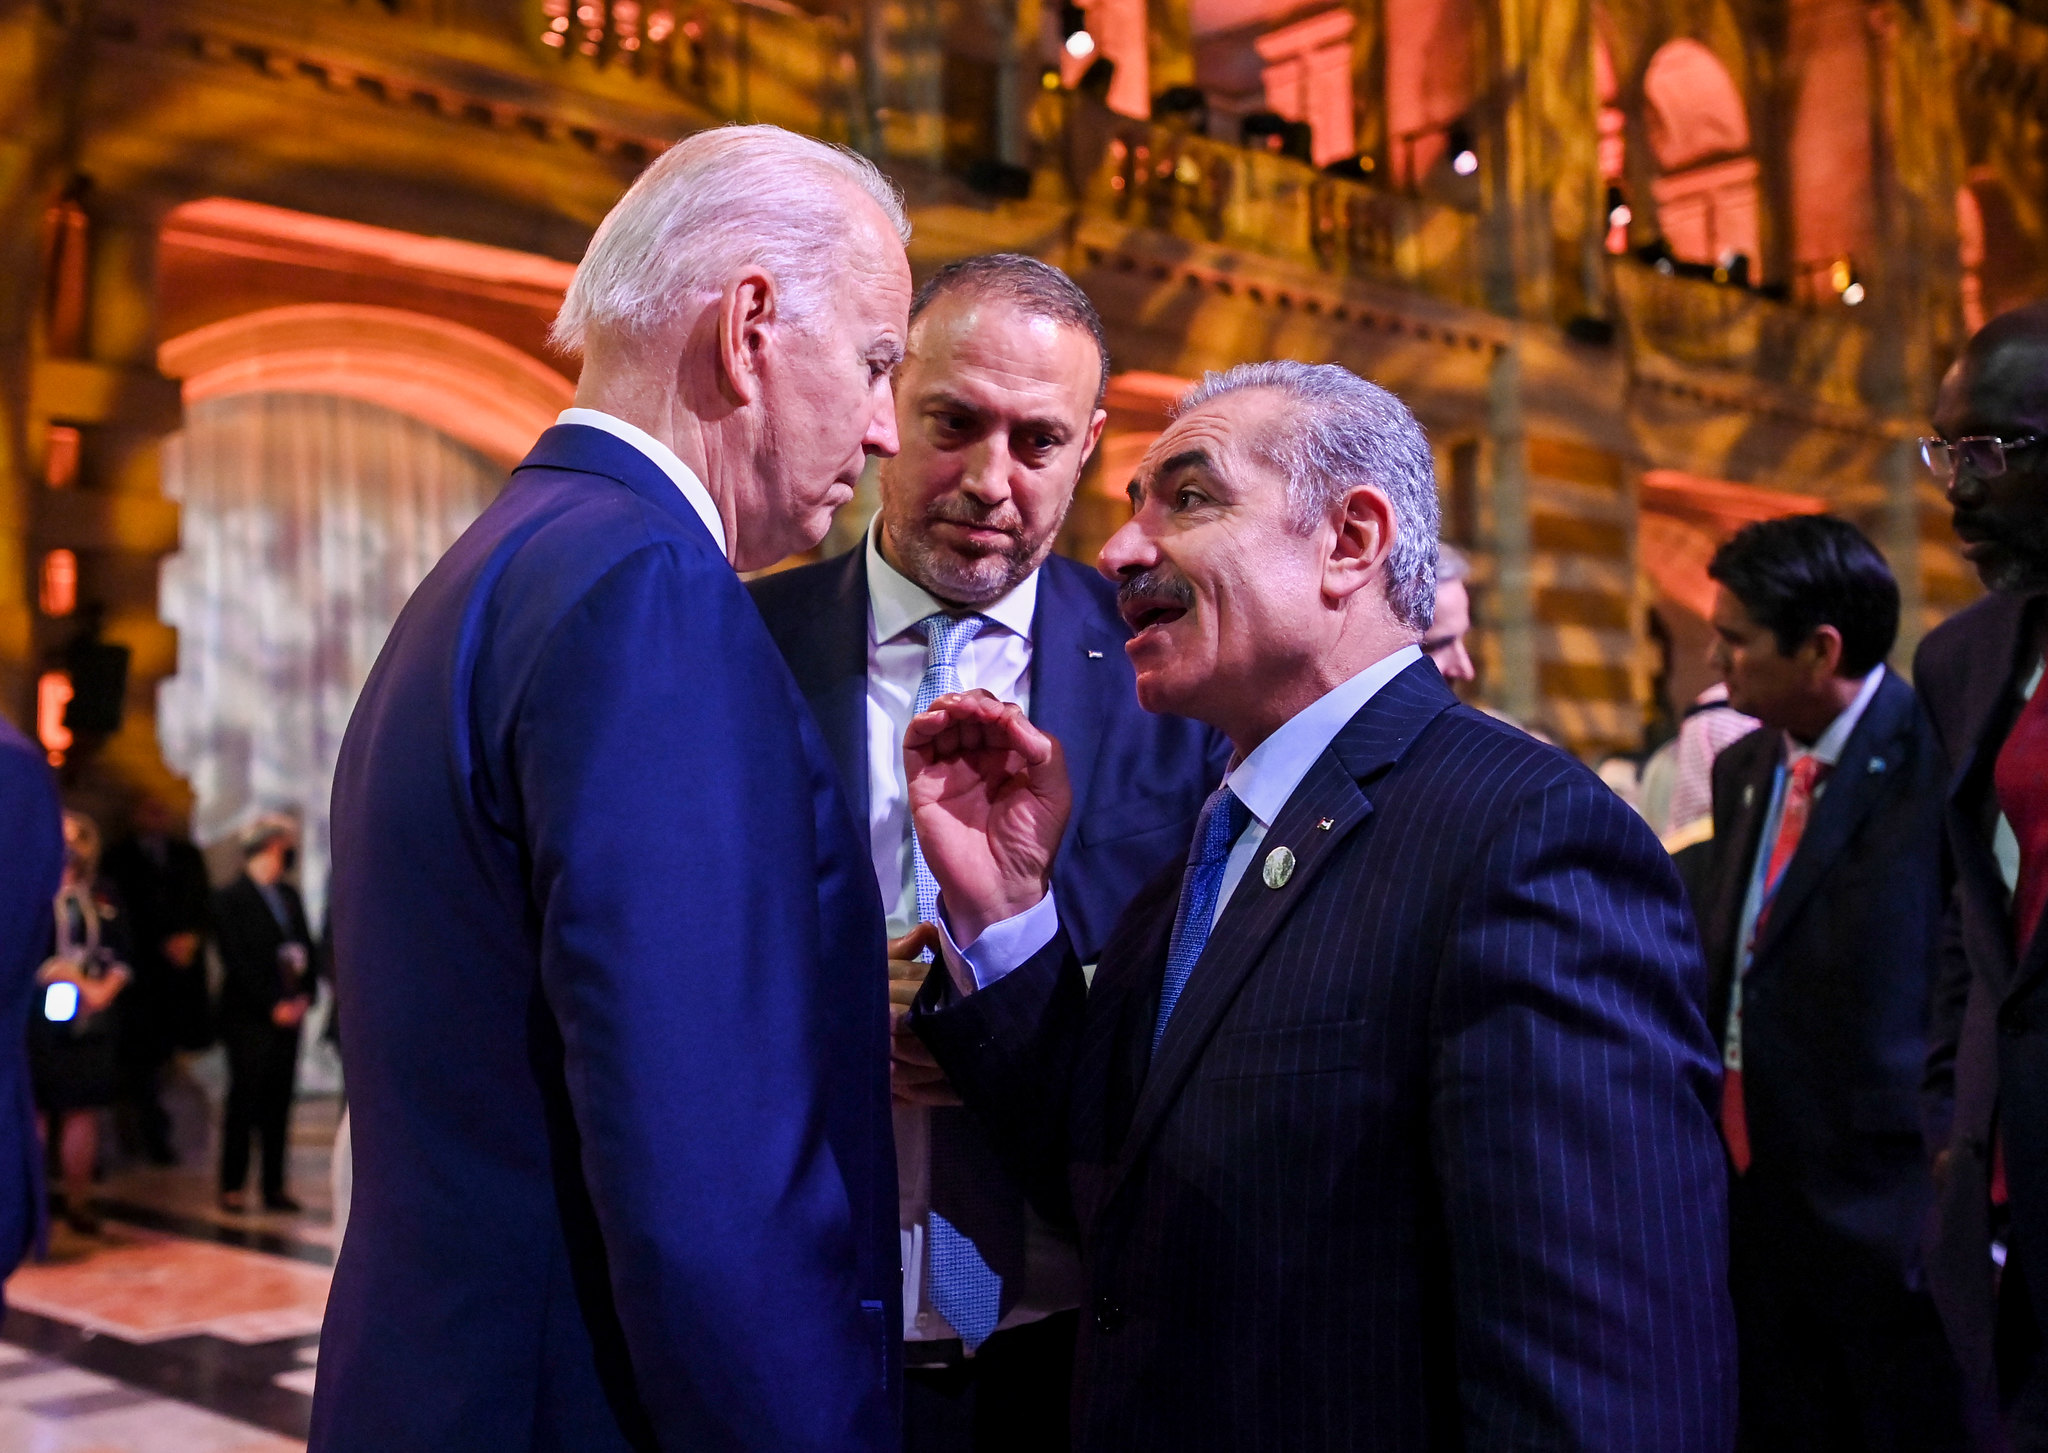 US President Joe Biden and Mohammad Shtayyeh, Prime Minister of the Palestinian Authority, talk at a COP26 reception at the Kelvingrove Art Gallery.